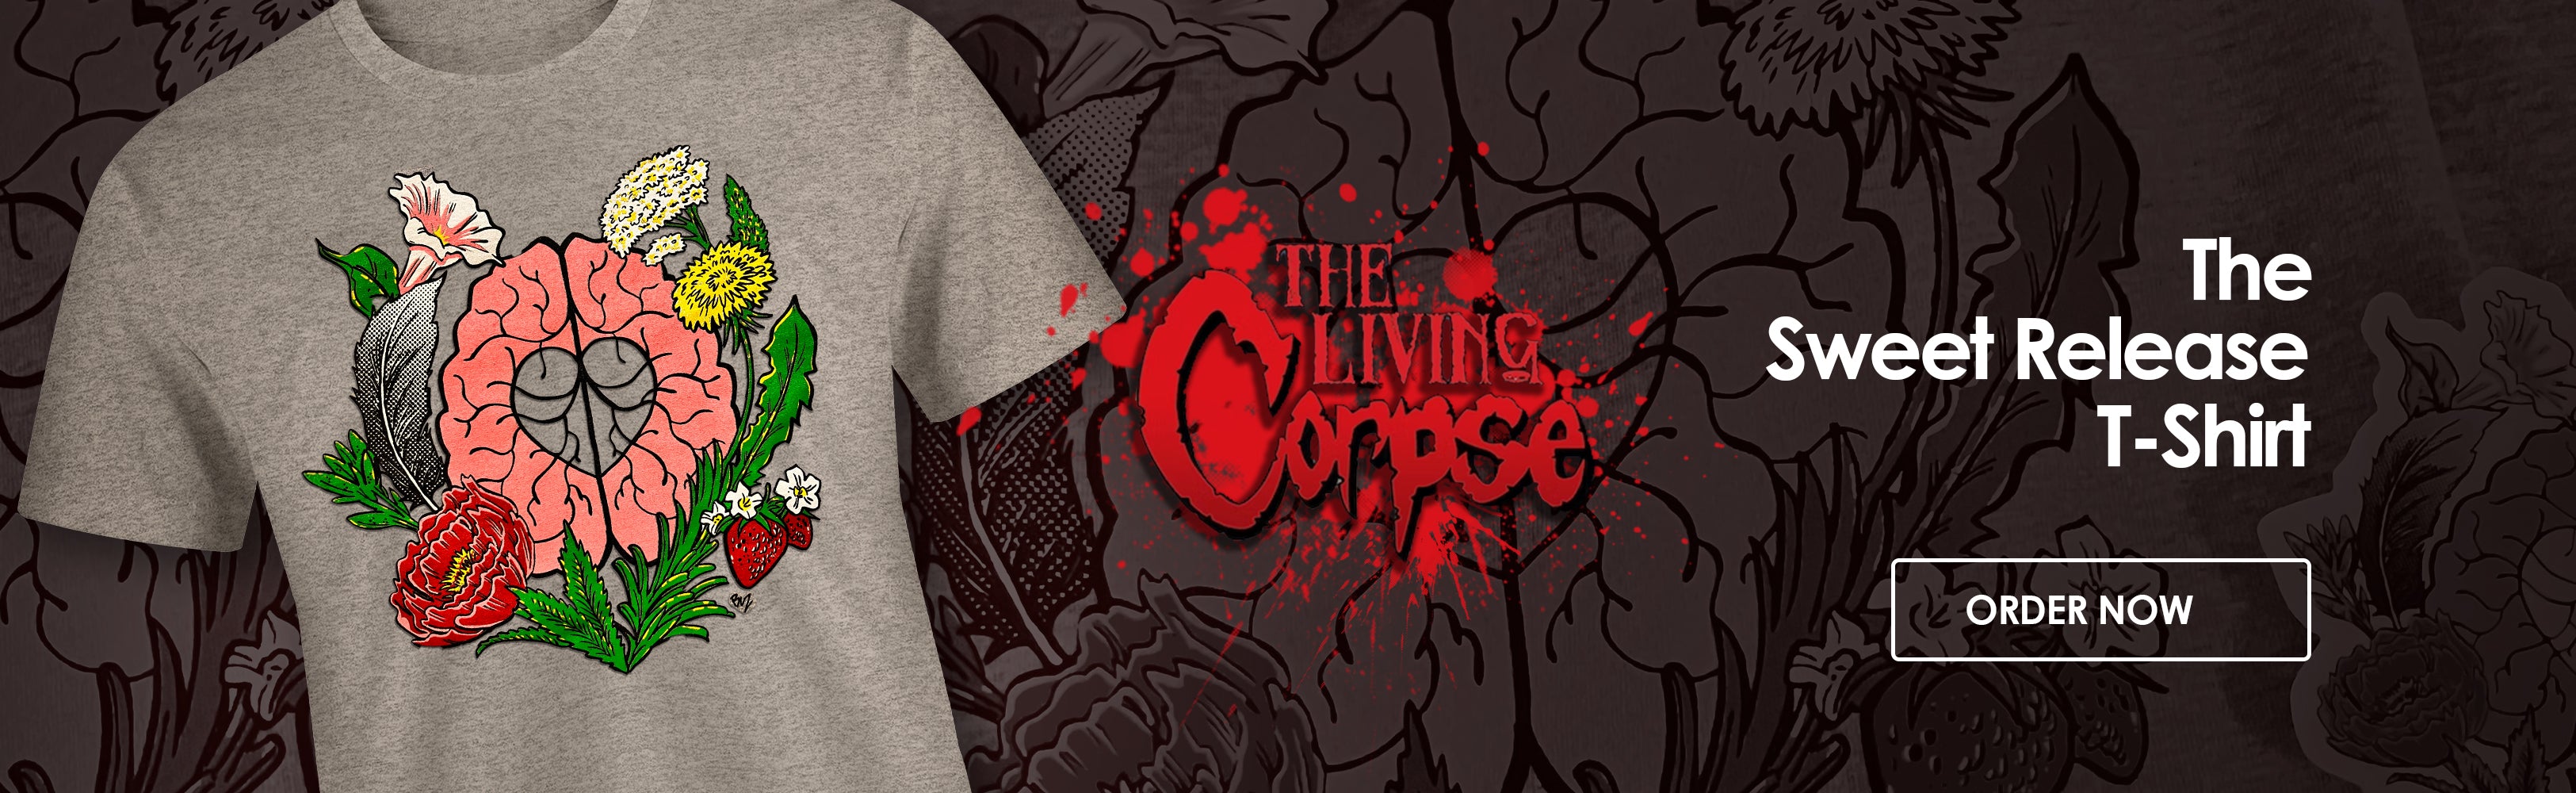 The Living Corpse: Sweet Release t-Shirt